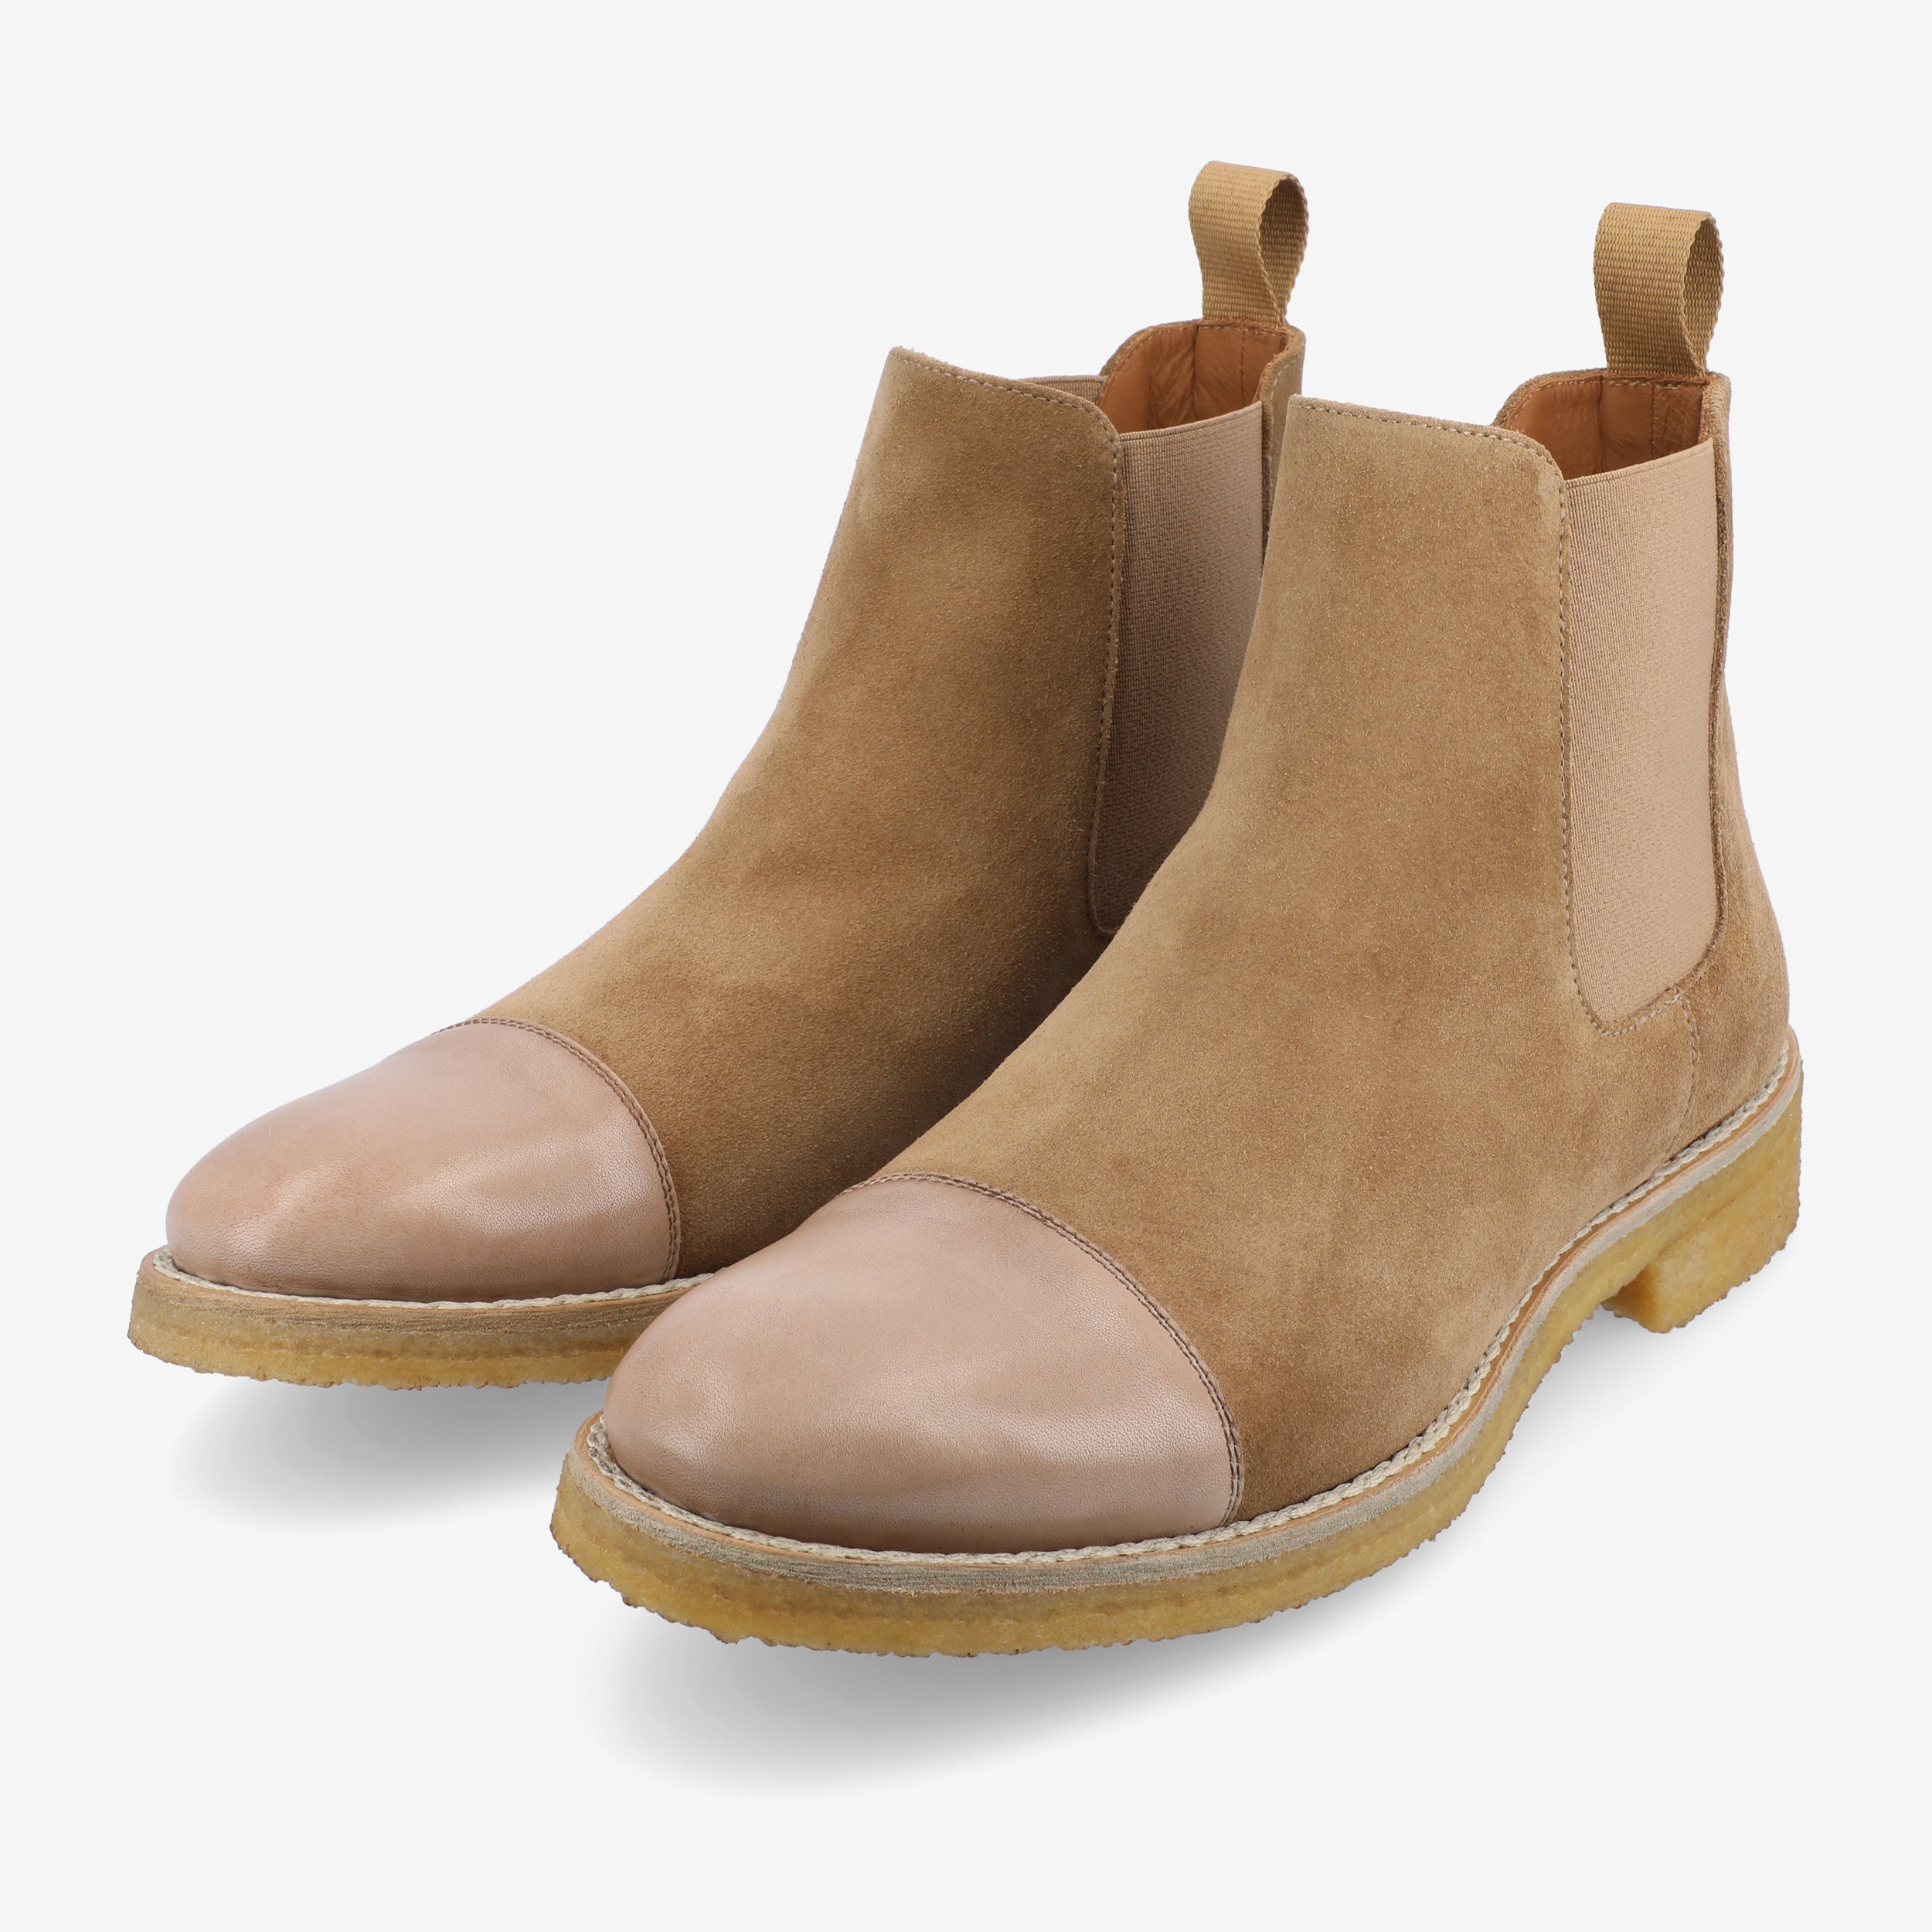 The Outback Boot in Ochre (Last Chance, Final Sale)